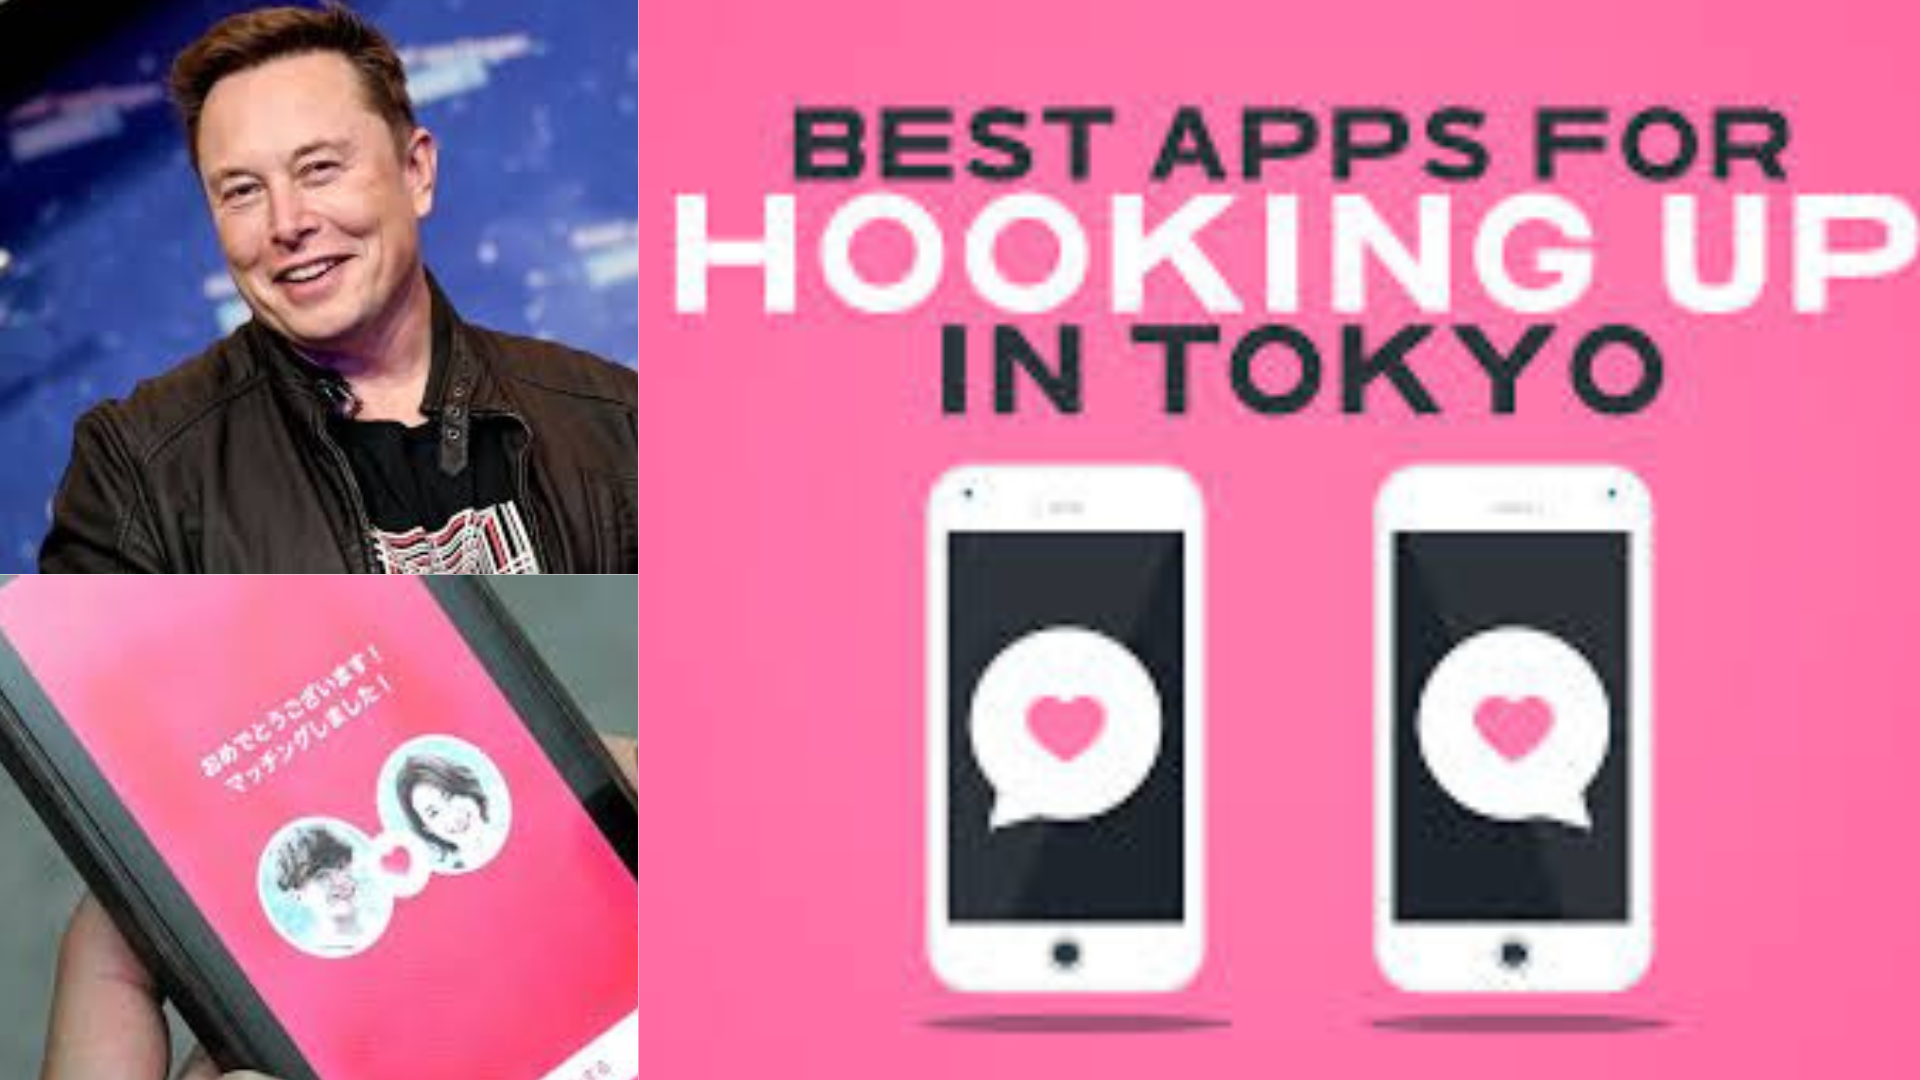 Tokyo's Dating App Initiative Aims To Revitalize Birth Rate: 'I Am Glad' Says Elon Musk